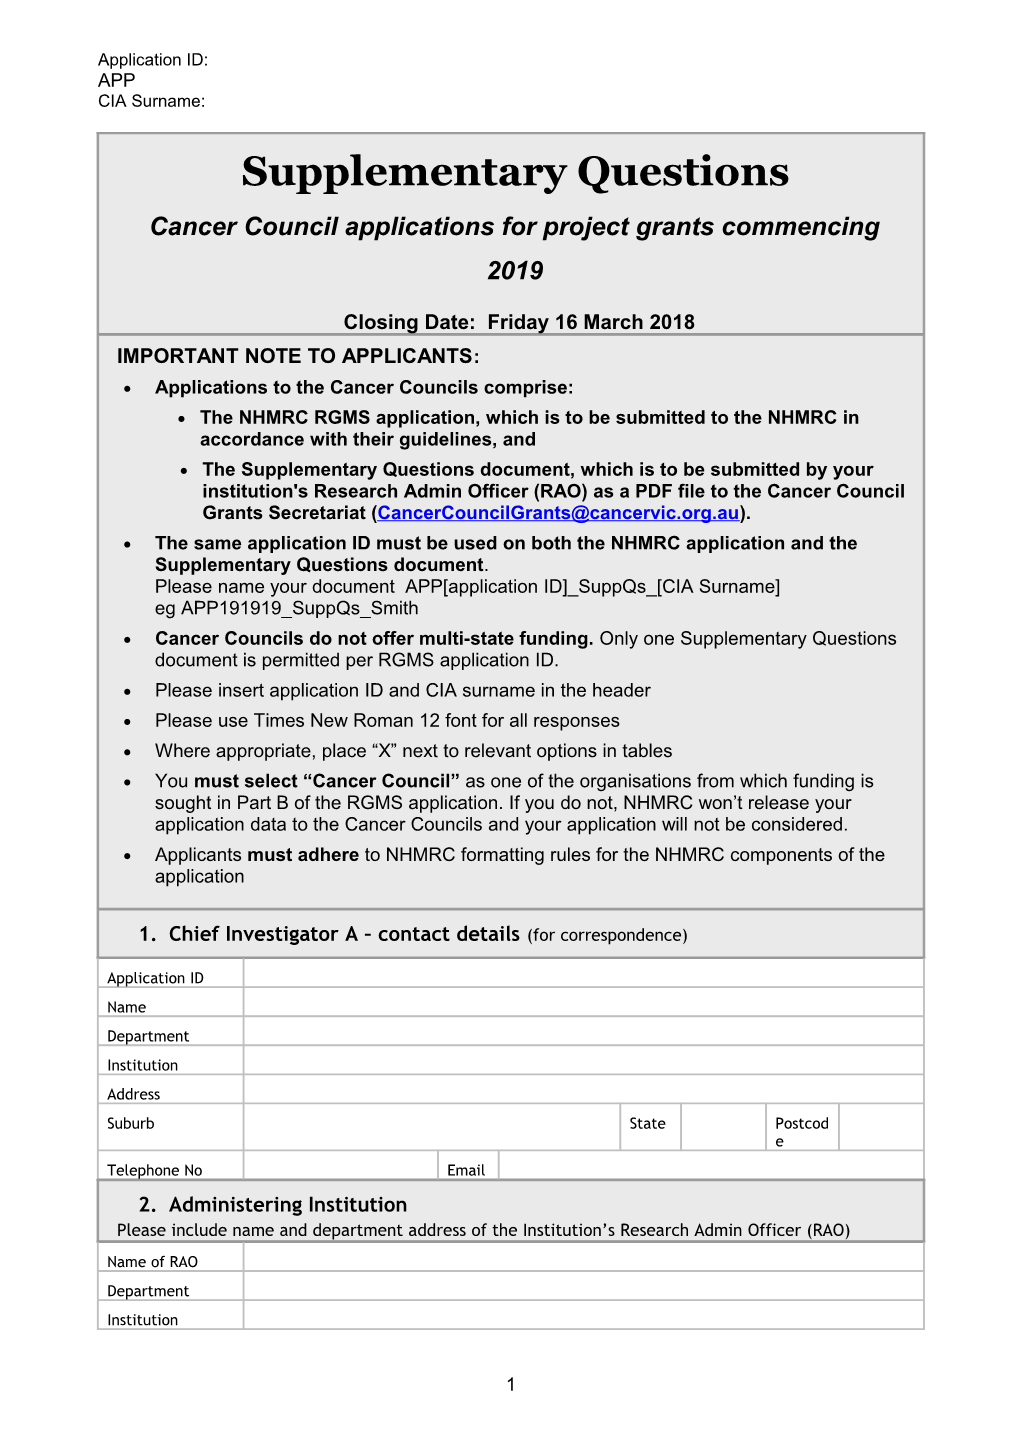 Applications to the Cancer Councils Comprise